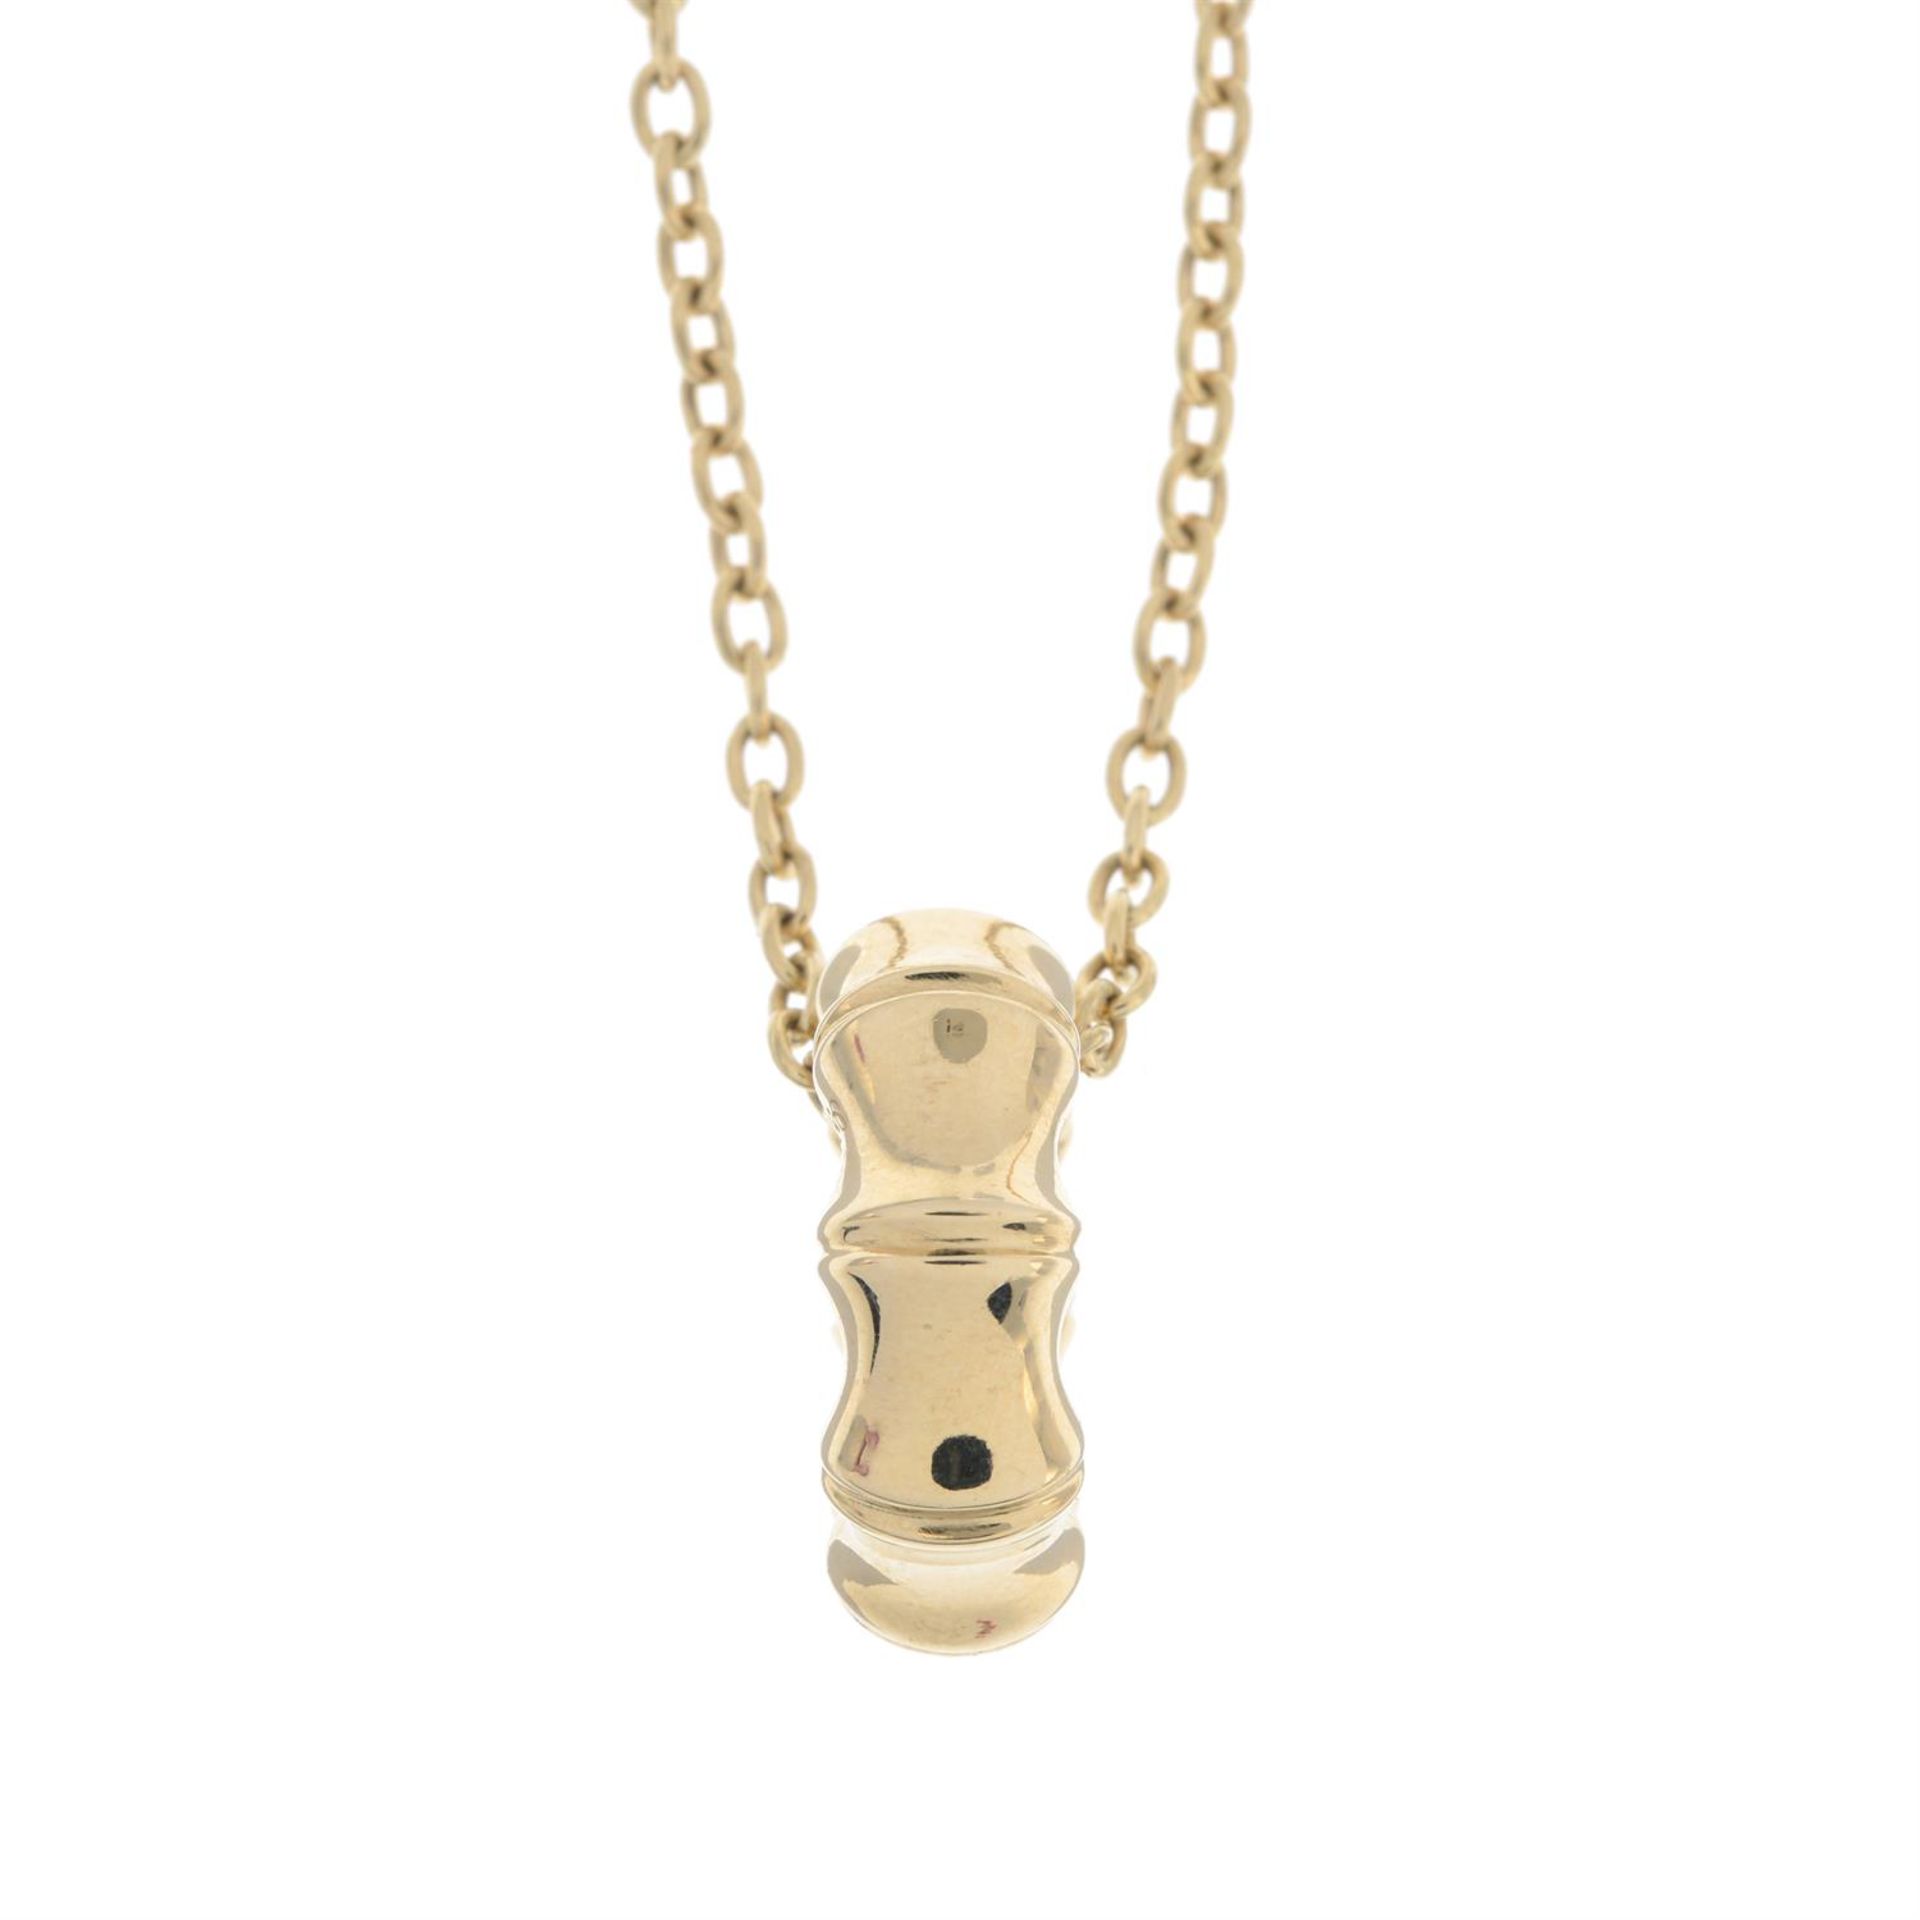 18ct gold bamboo pendant, on chain, by Gucci - Image 2 of 4